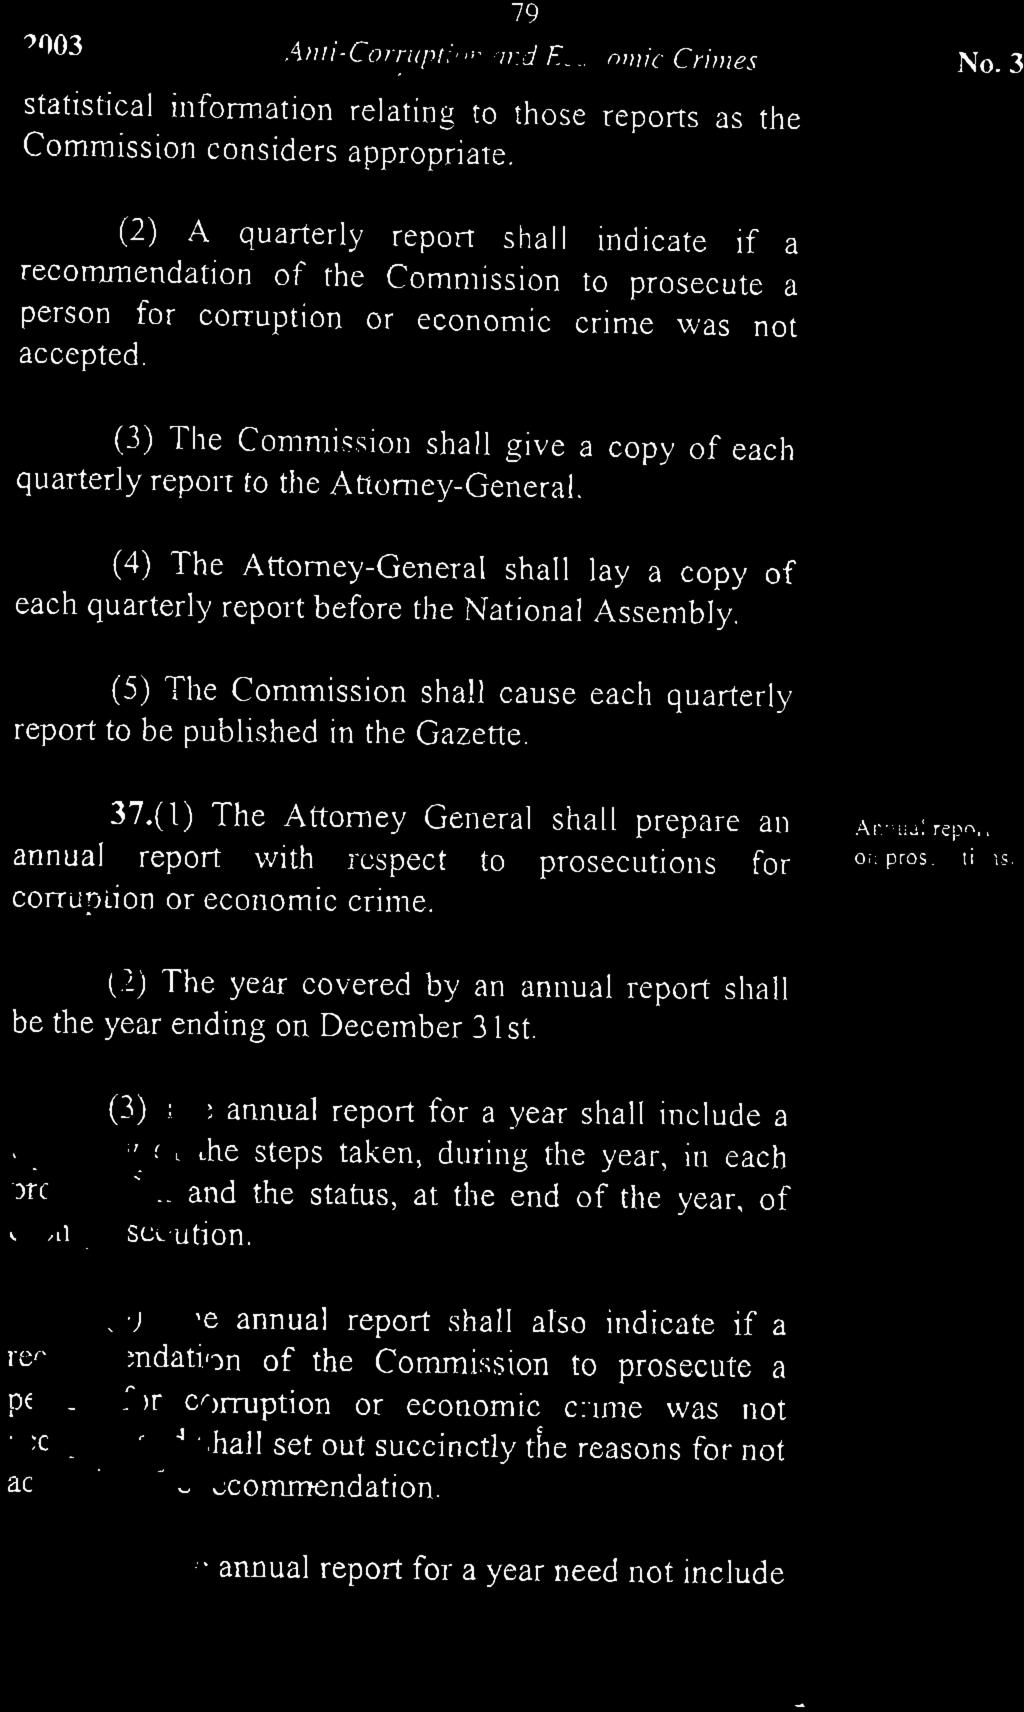 quarterly report to the Attorney-General. (4) The Attorney-General shall lay a copy of each quarterly report before the National Assembly.